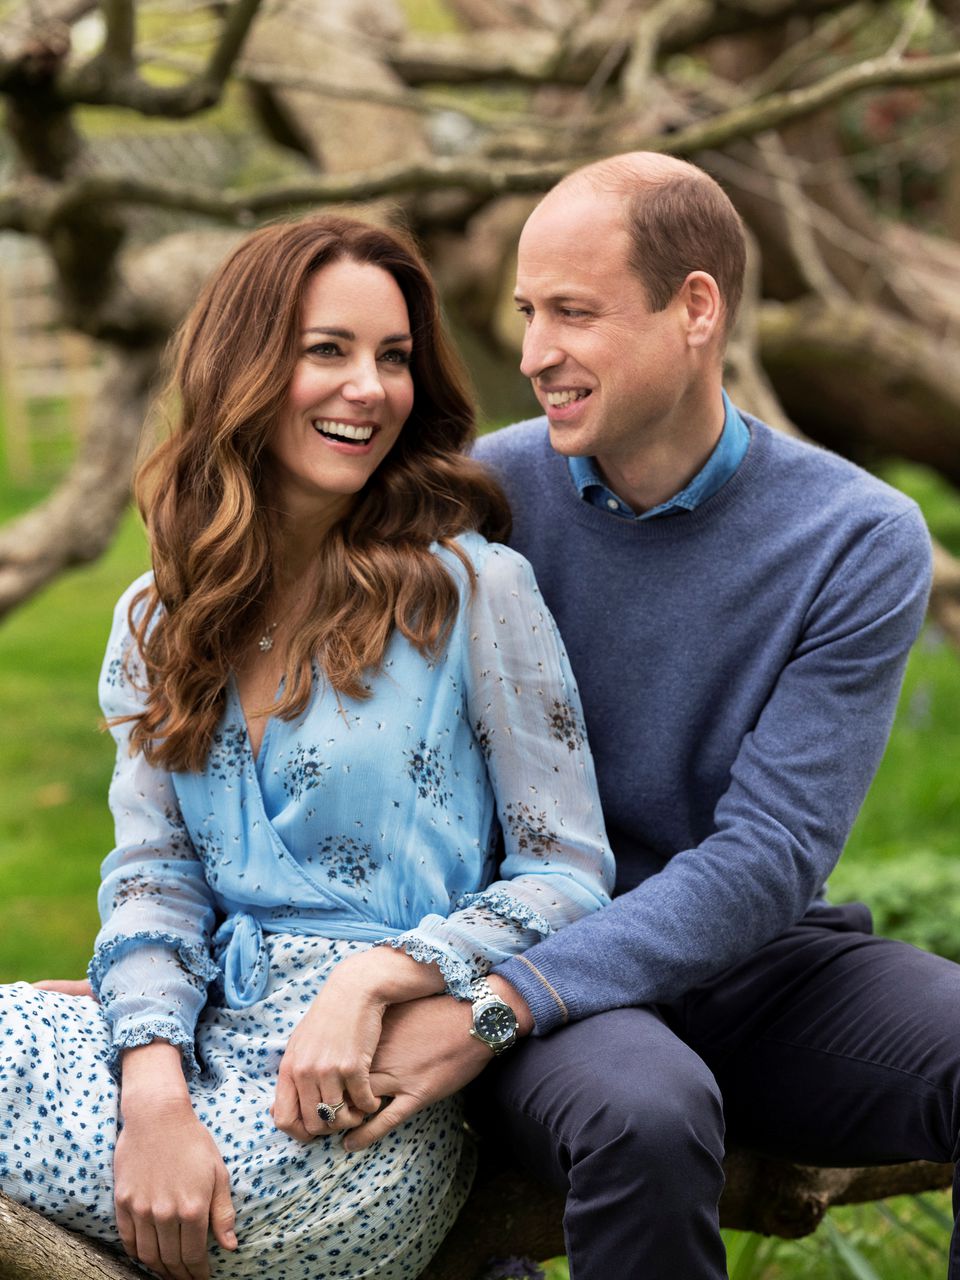  Britain’s Prince William and Kate mark 10th wedding anniversary with video